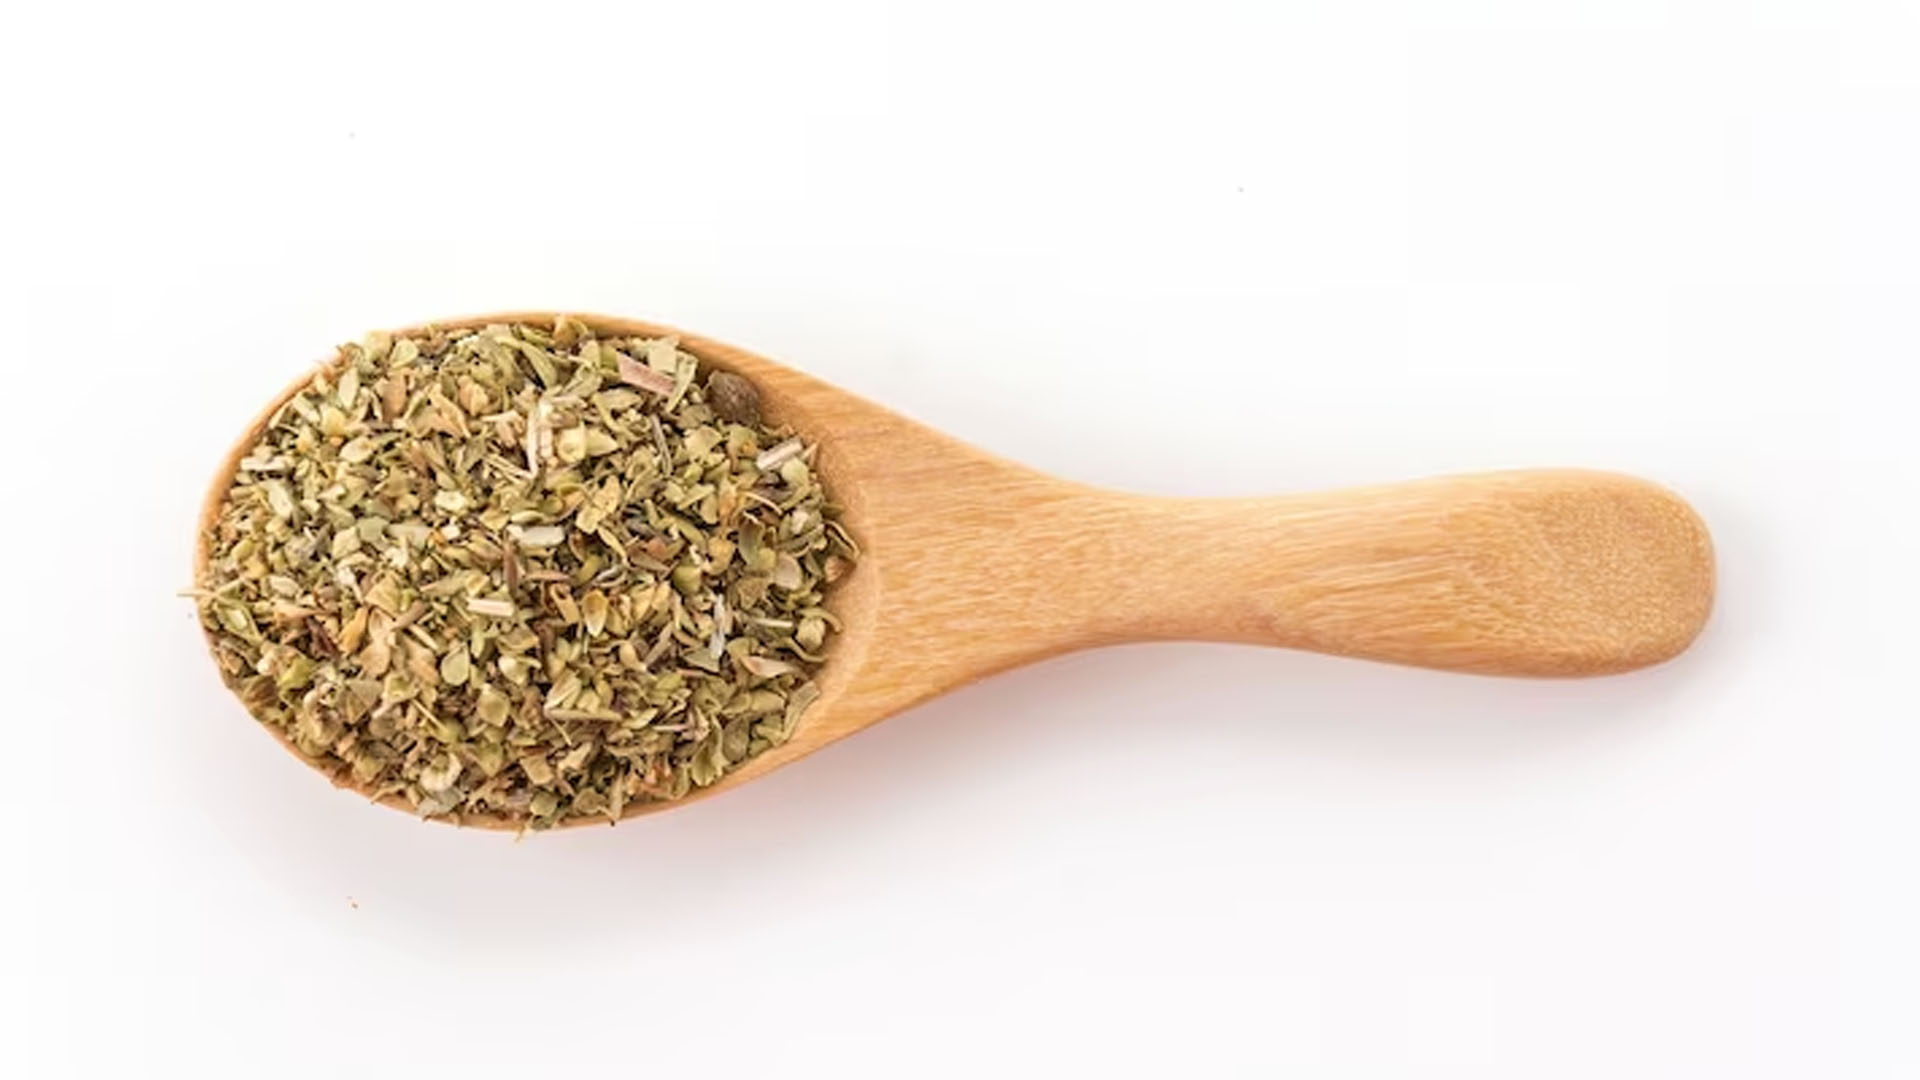 What Are The Health Benefits of Oregano?